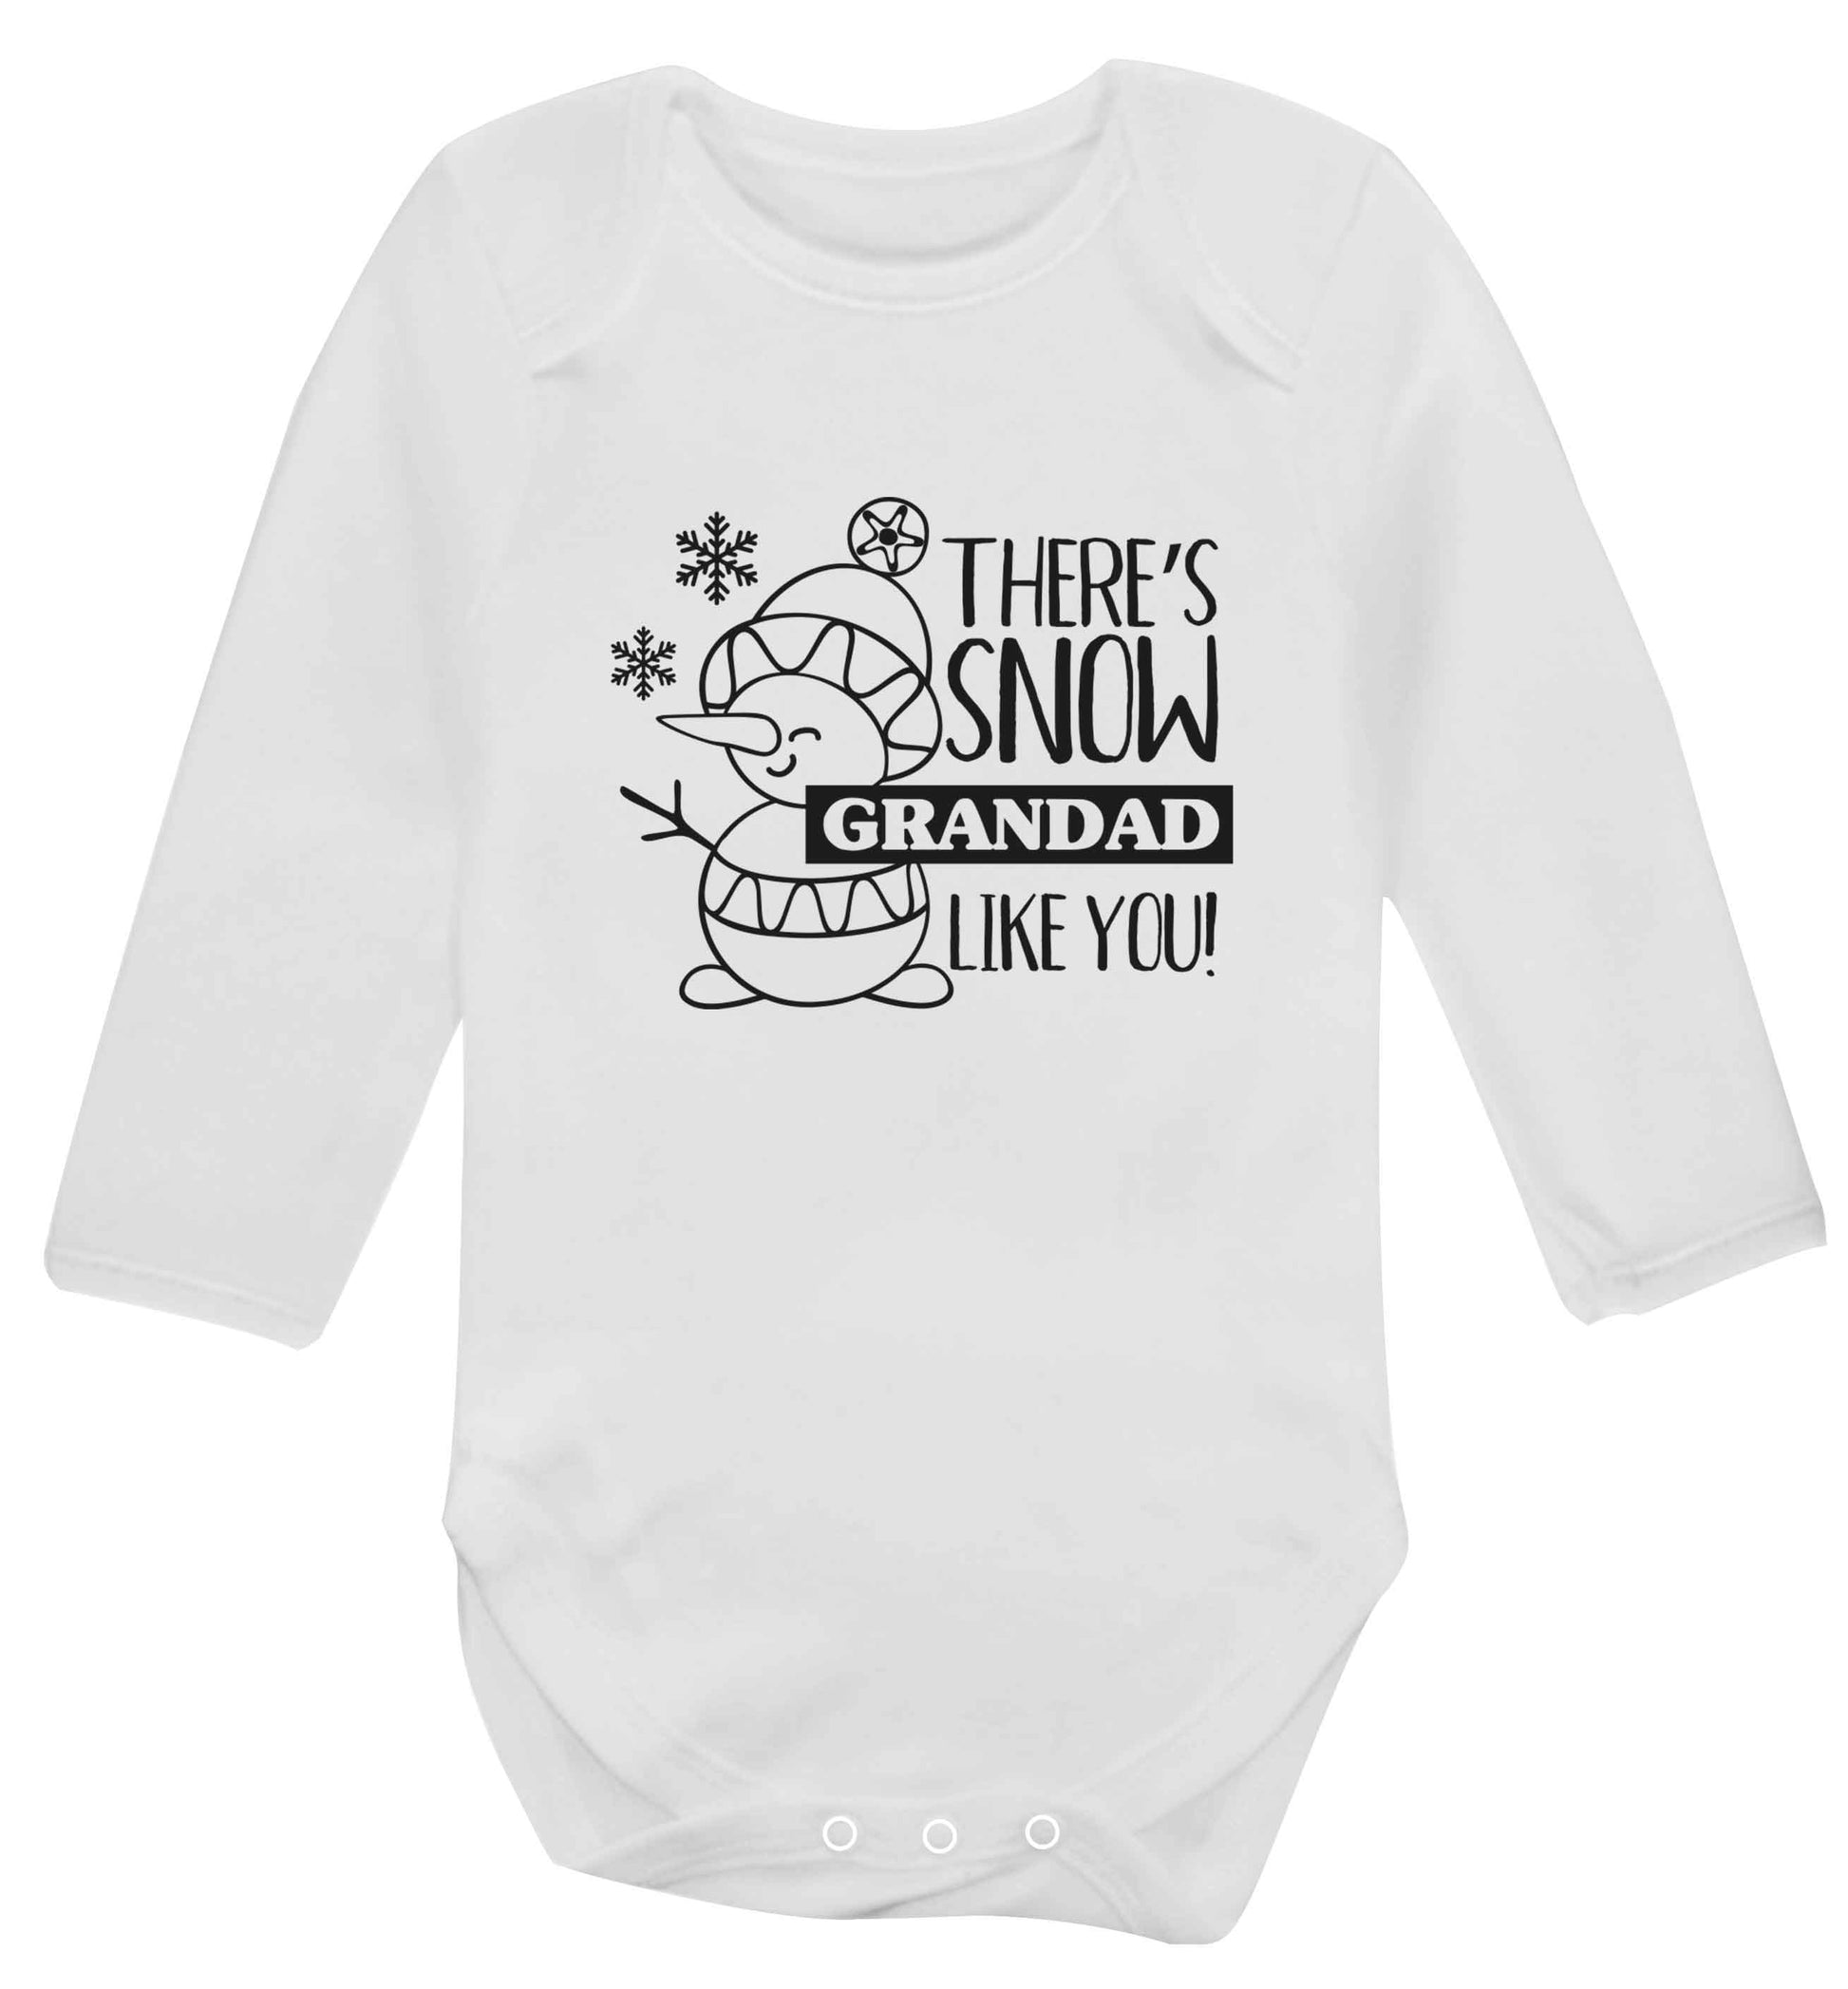 There's snow grandad like you baby vest long sleeved white 6-12 months